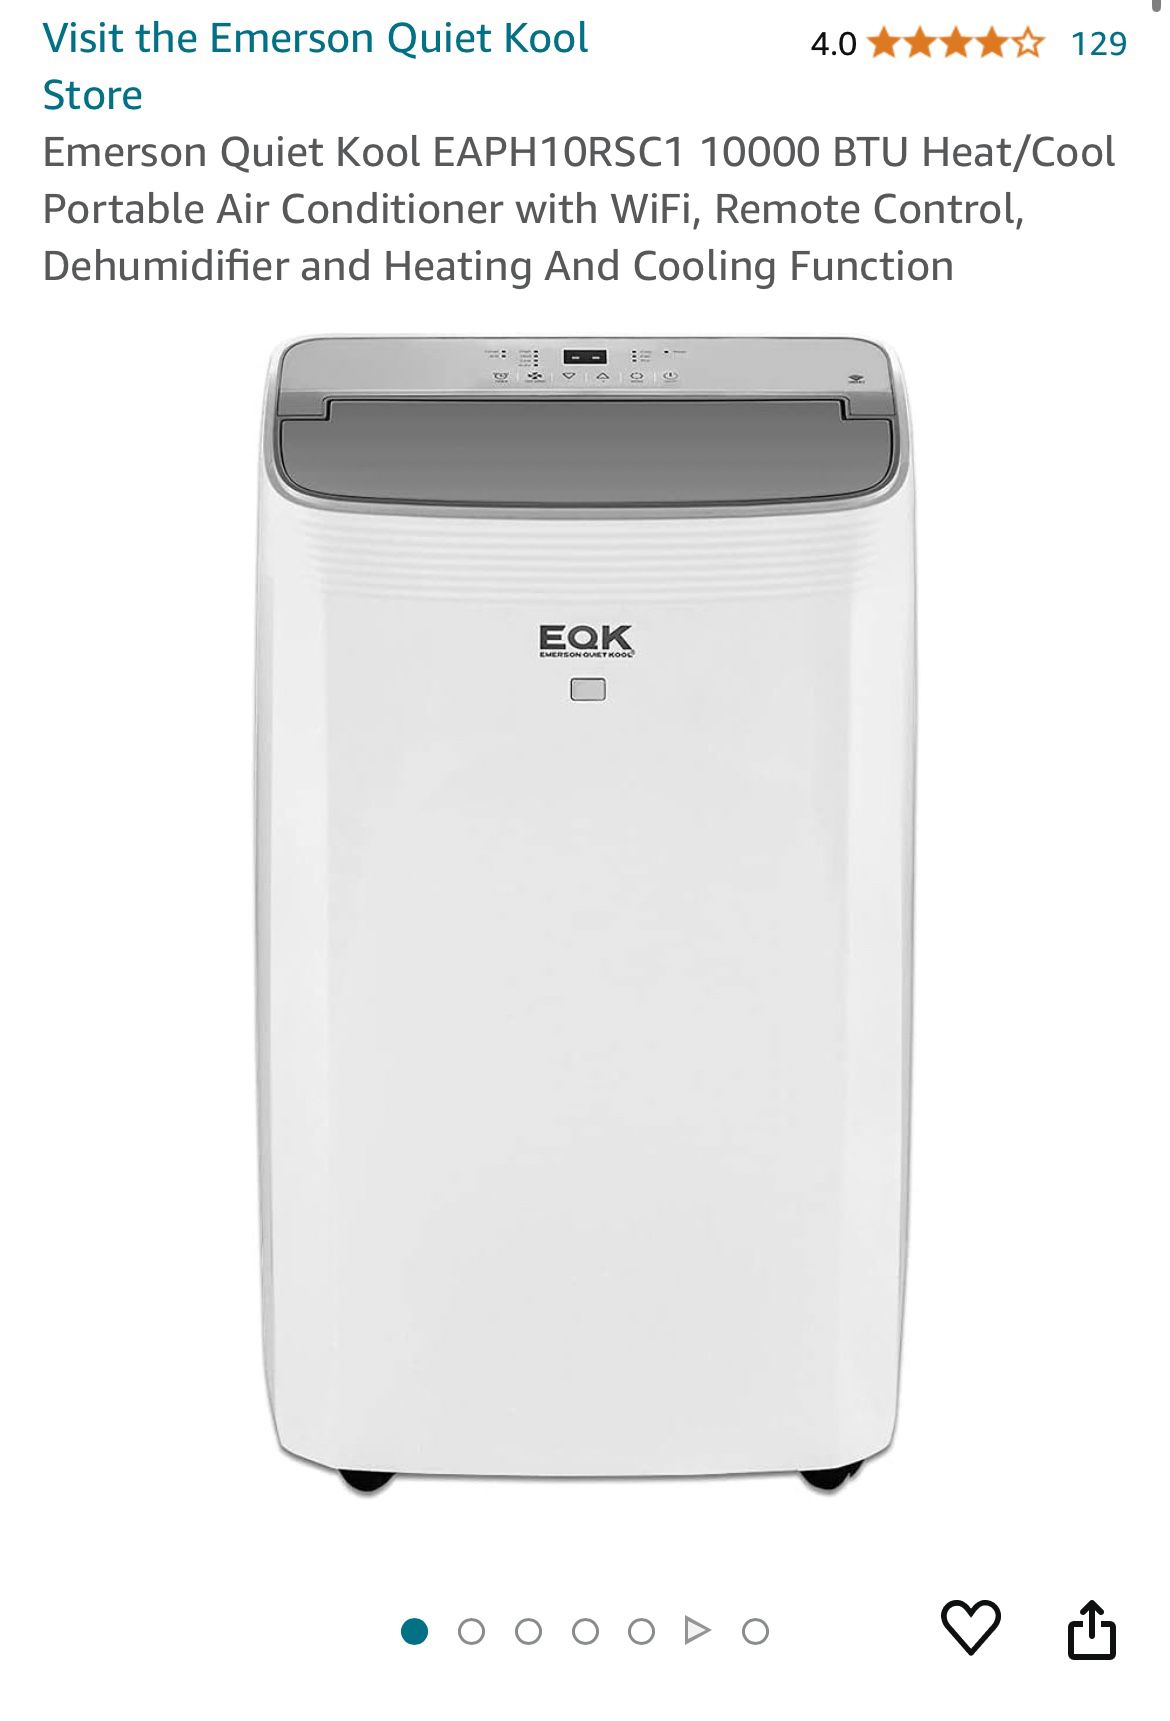 Emerson Quiet Kool EAPH10RSC1 10000 BTU Heat/Cool Portable Air Conditioner with WiFi, Remote Control, Dehumidifier and Heating And Cooling Function